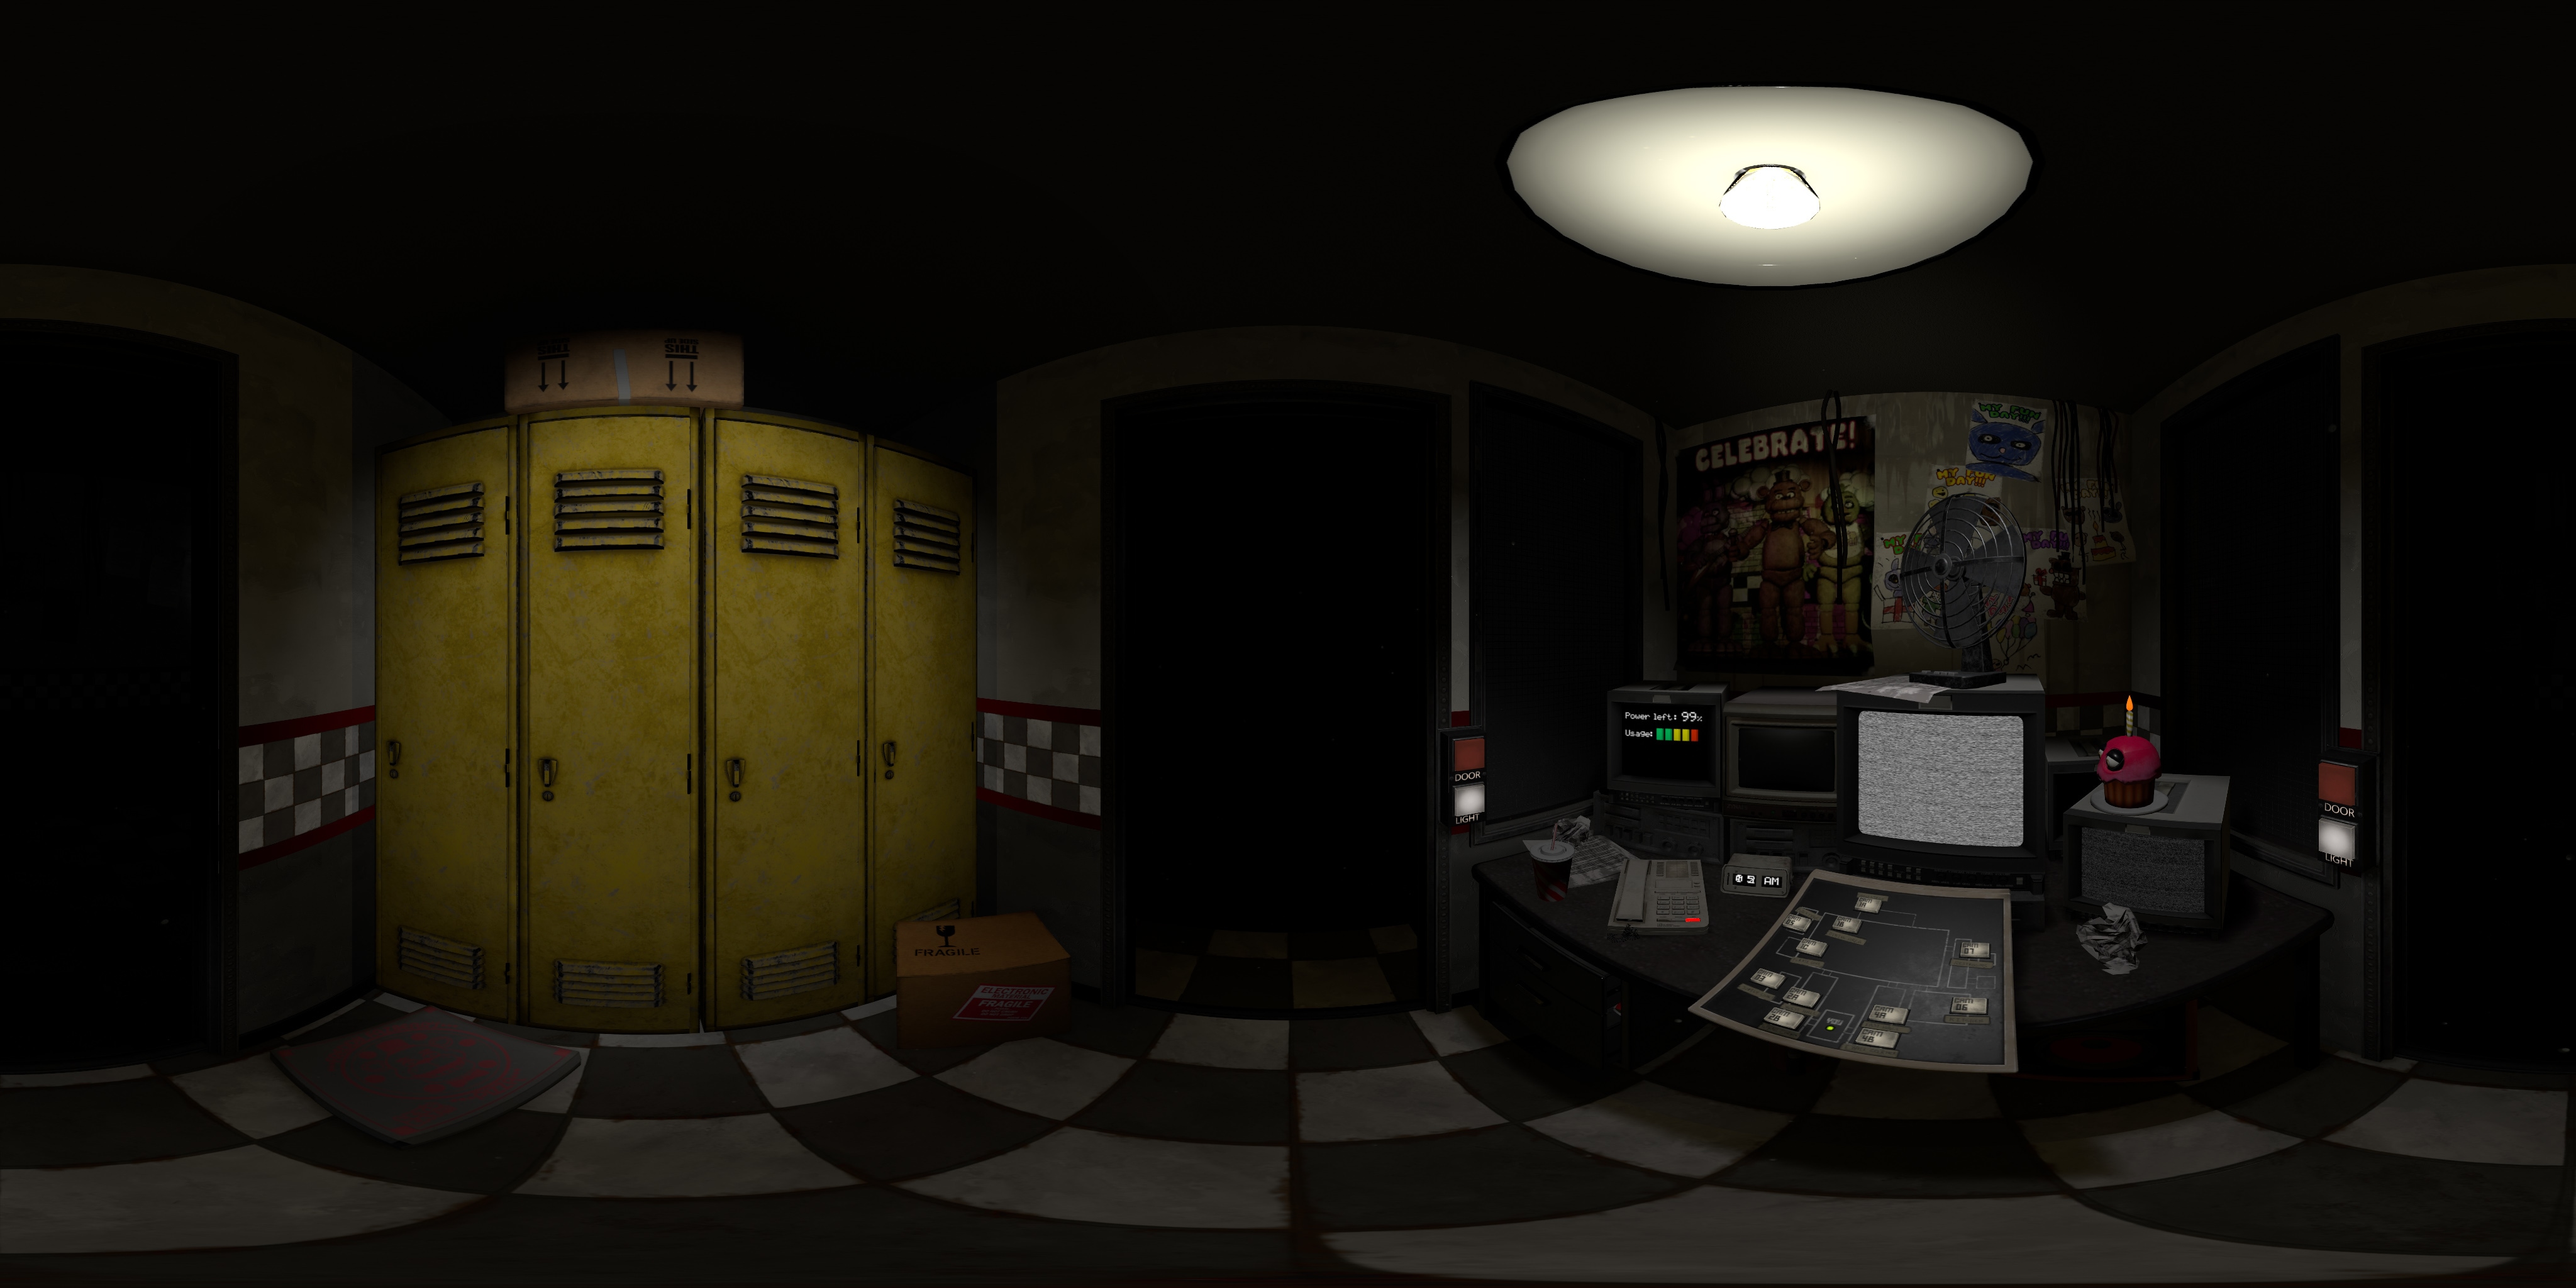 Five Nights at Freddy's: Help Wanted - VR Game from the OCULUS Store (